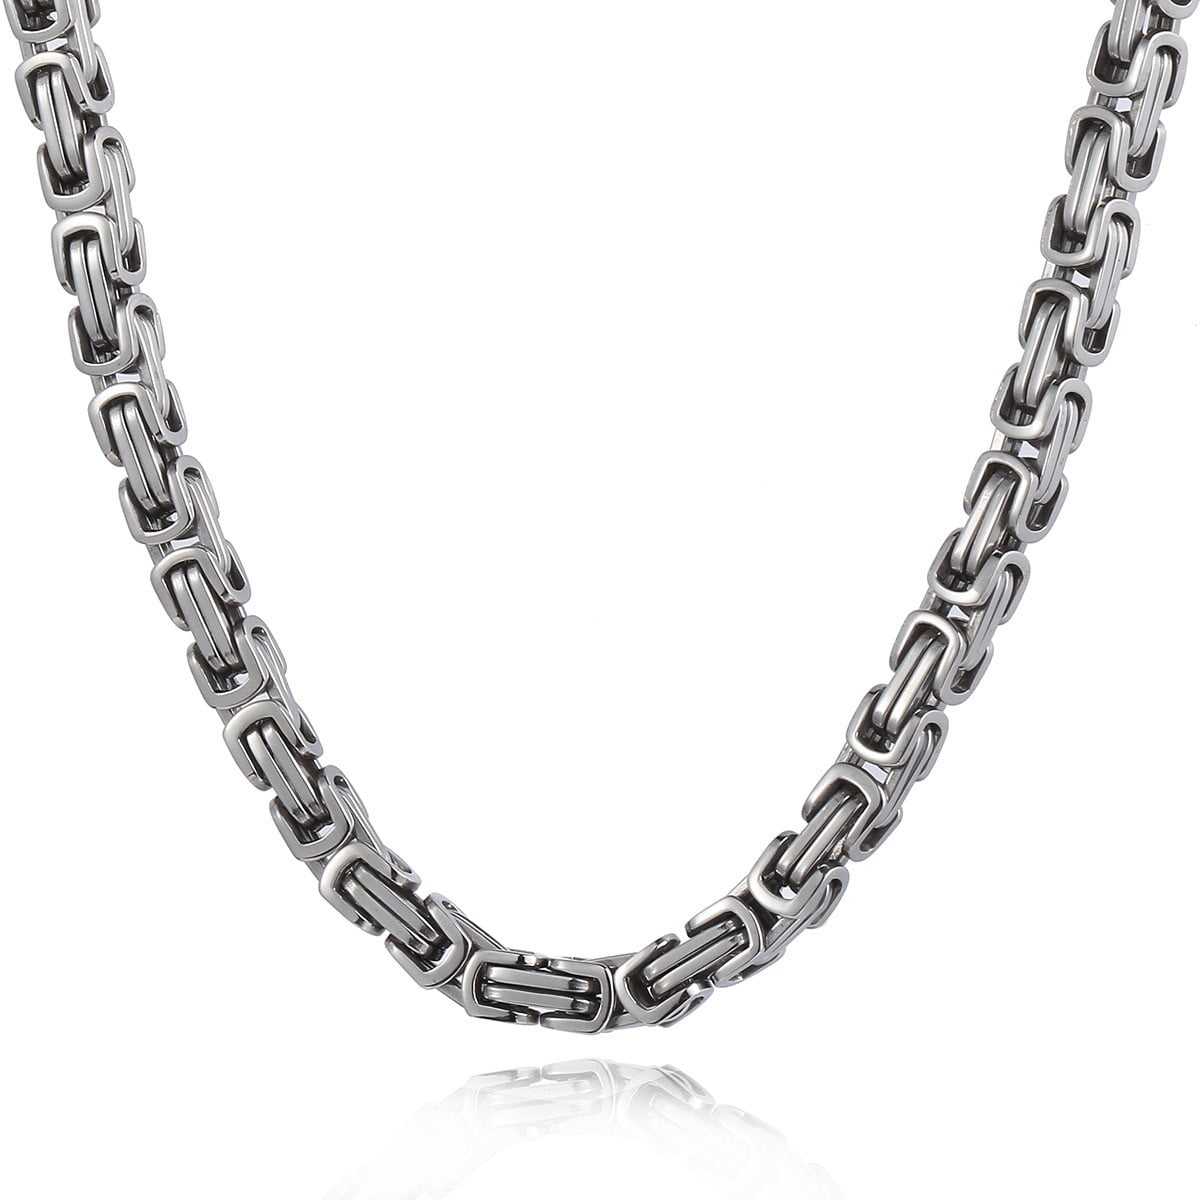 Hermah - Hermah 5mm Mens Boys Byzantine Box Necklace Chain Silver Tone Stainless Steel Men's Necklace